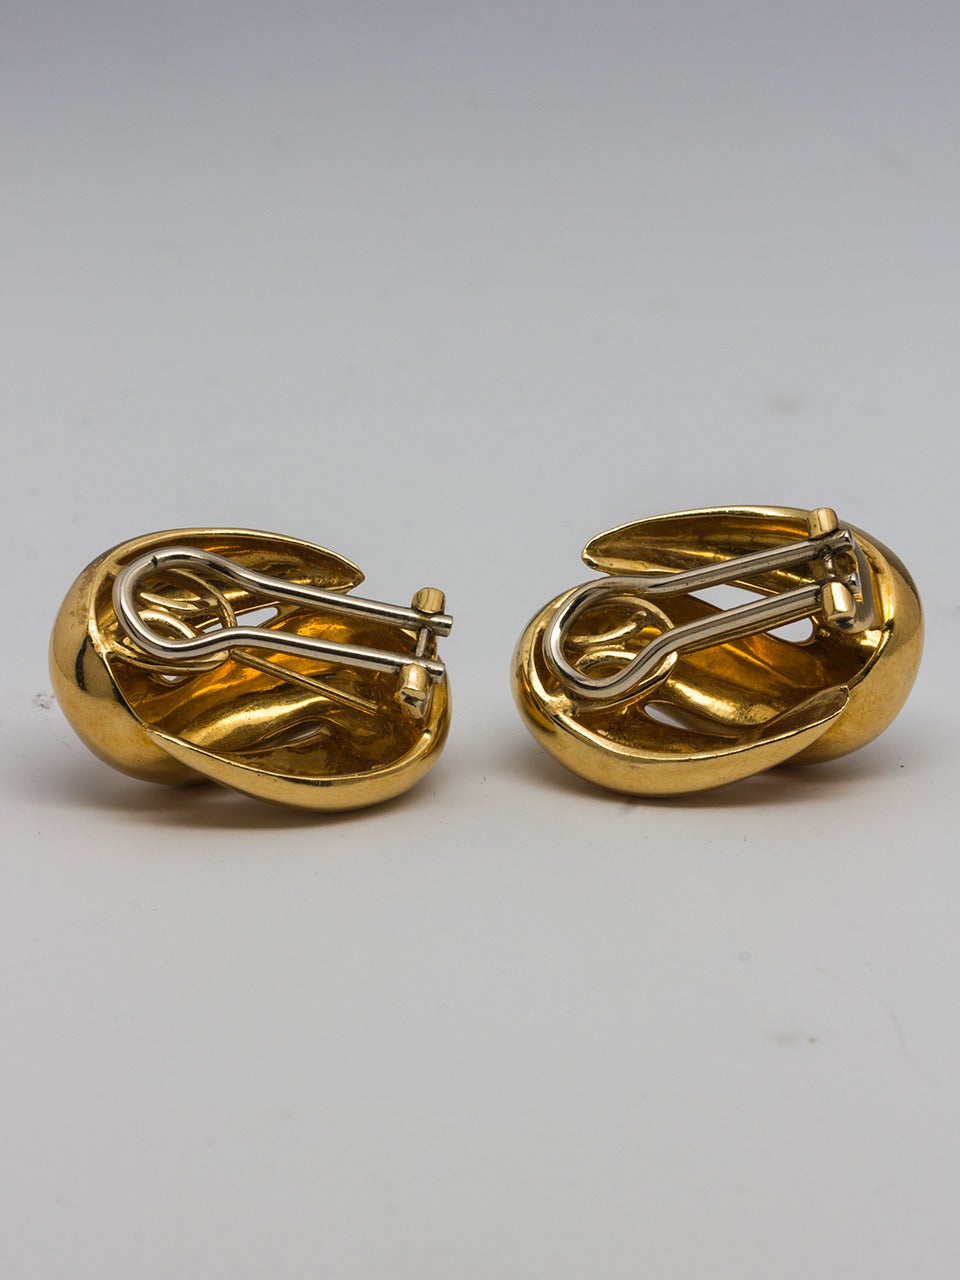 18K yellow gold moderne organic style French clip-on earrings. Measuring 1 inch long x 3/4" inch wide. Glamorous and high styled. Reminiscent of Elsa Peretti designs. Weighing 18.5 grams. 

As a special offering for our 1stdibs customers,